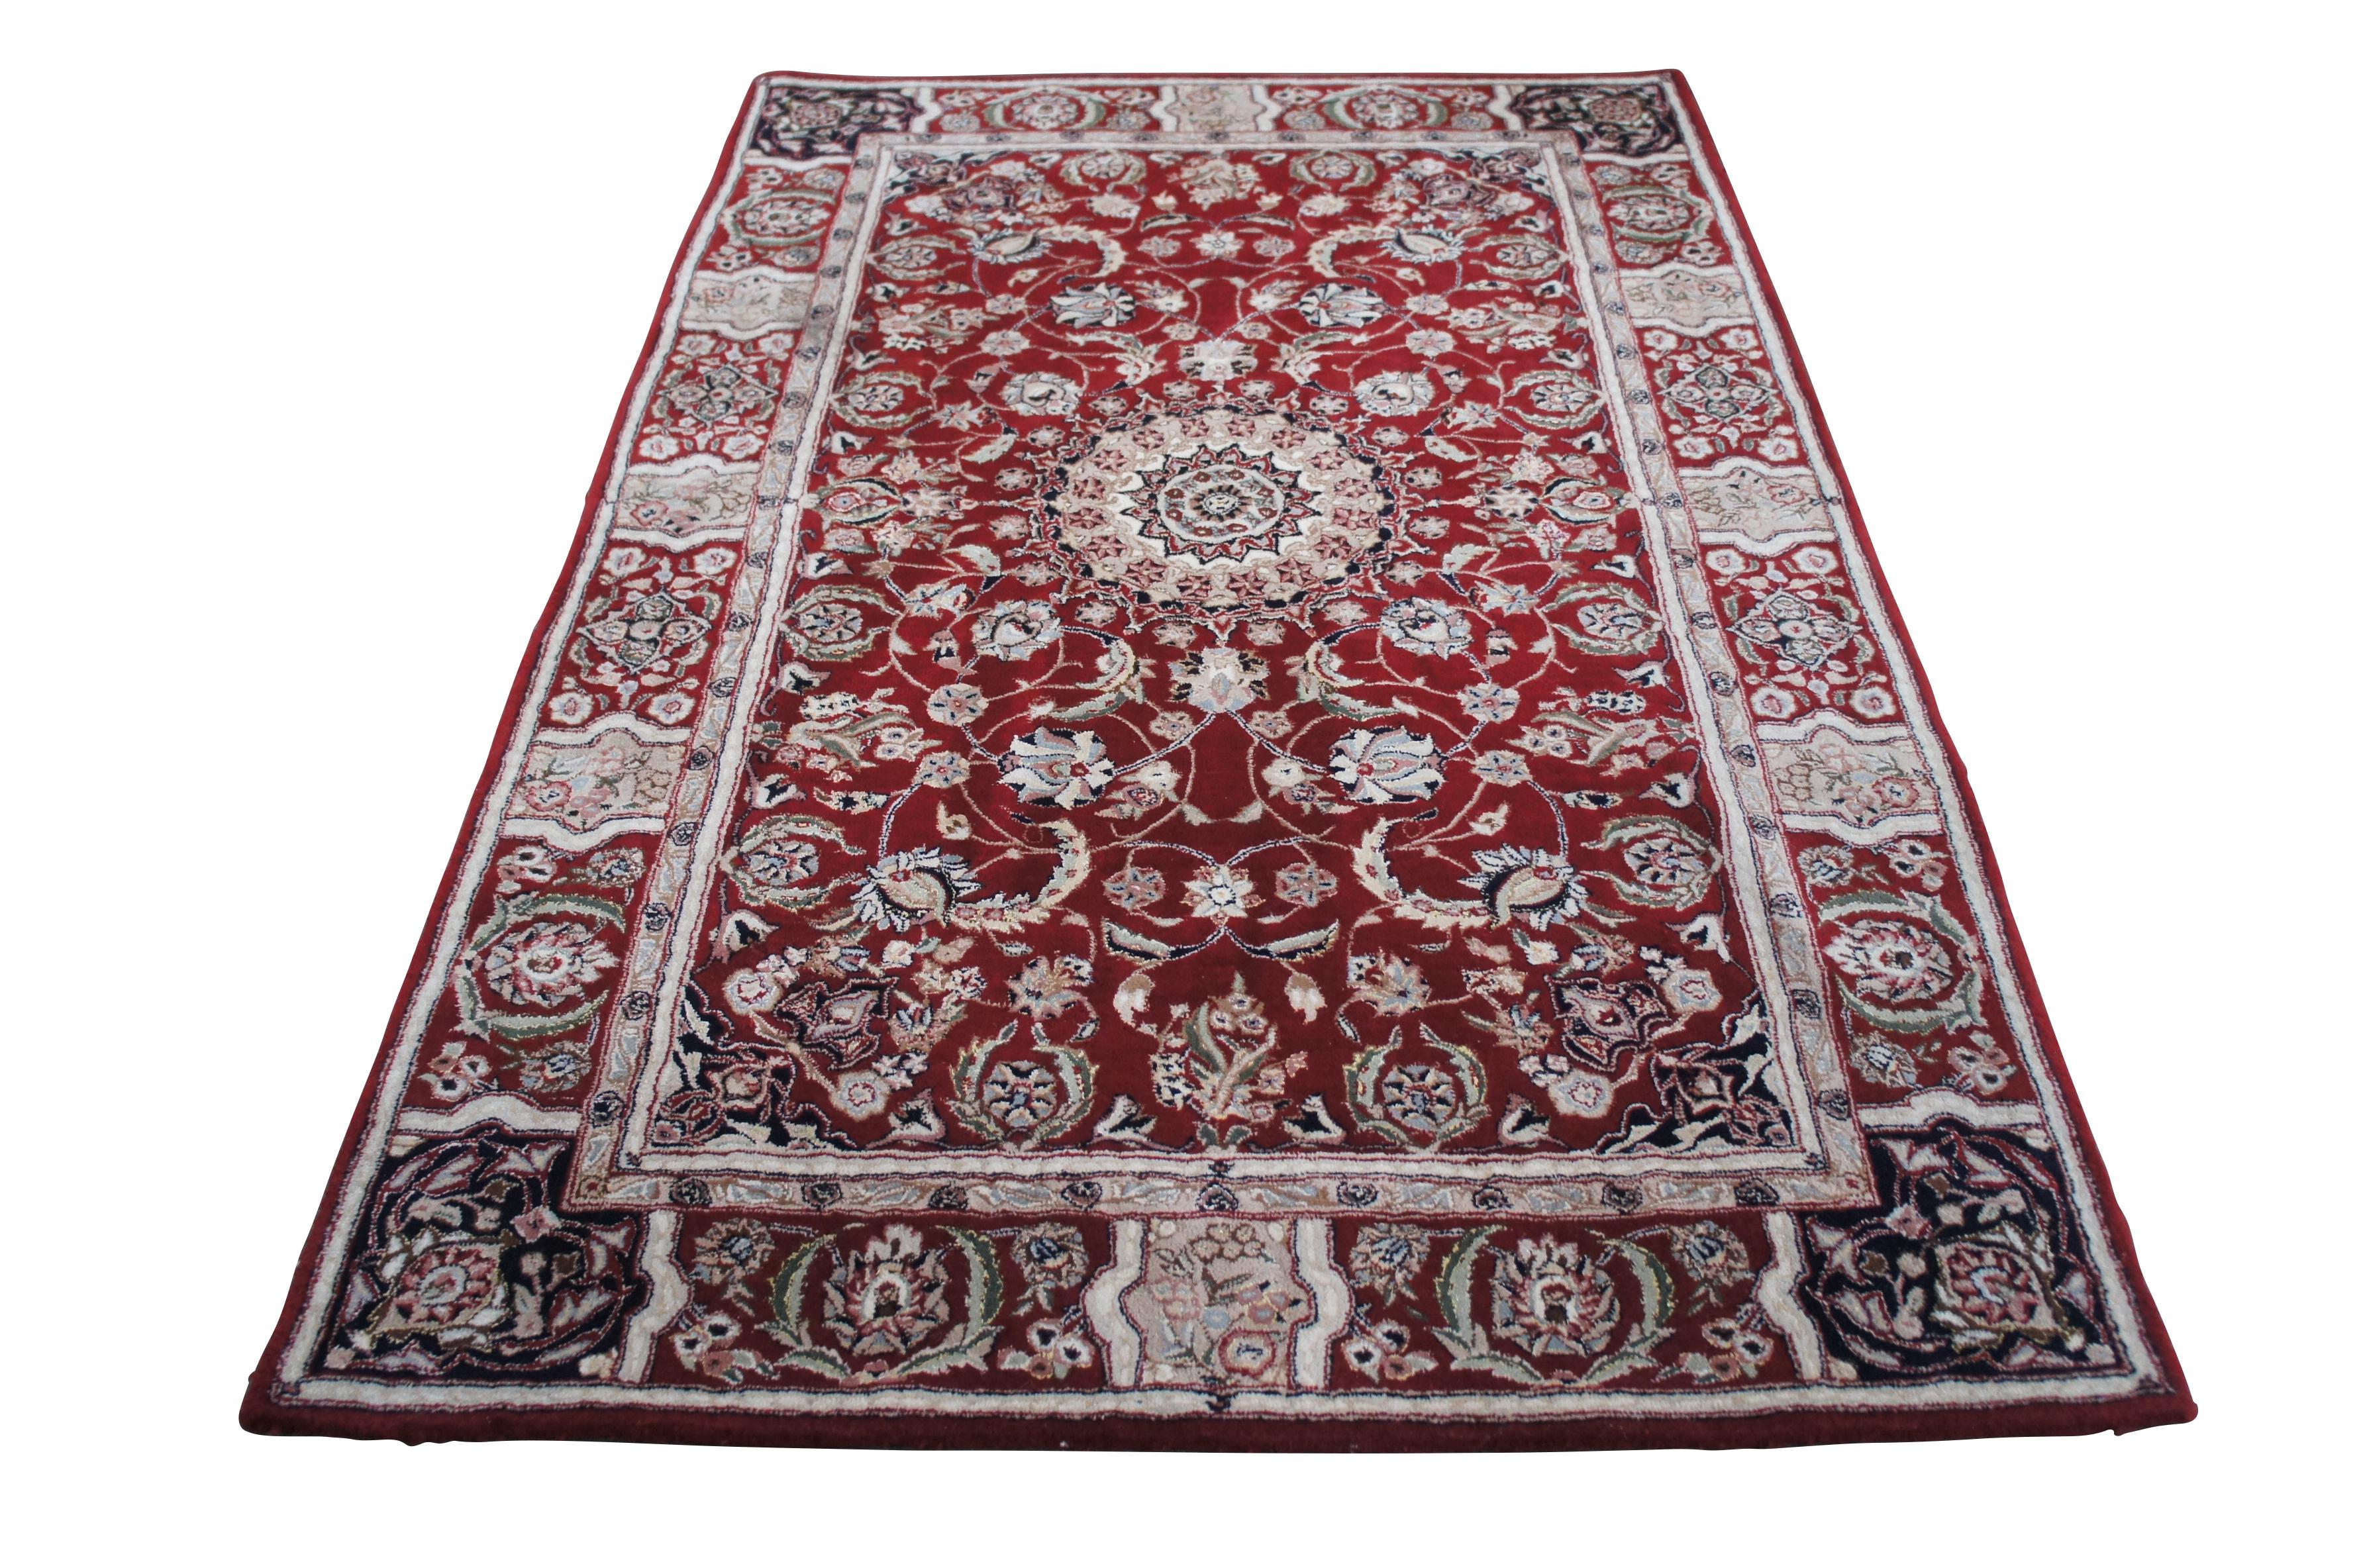 Chinese Export Vintage Chinese Sino Floral All Over Persian Medallion Area Rug Carpet 5' x 8' For Sale